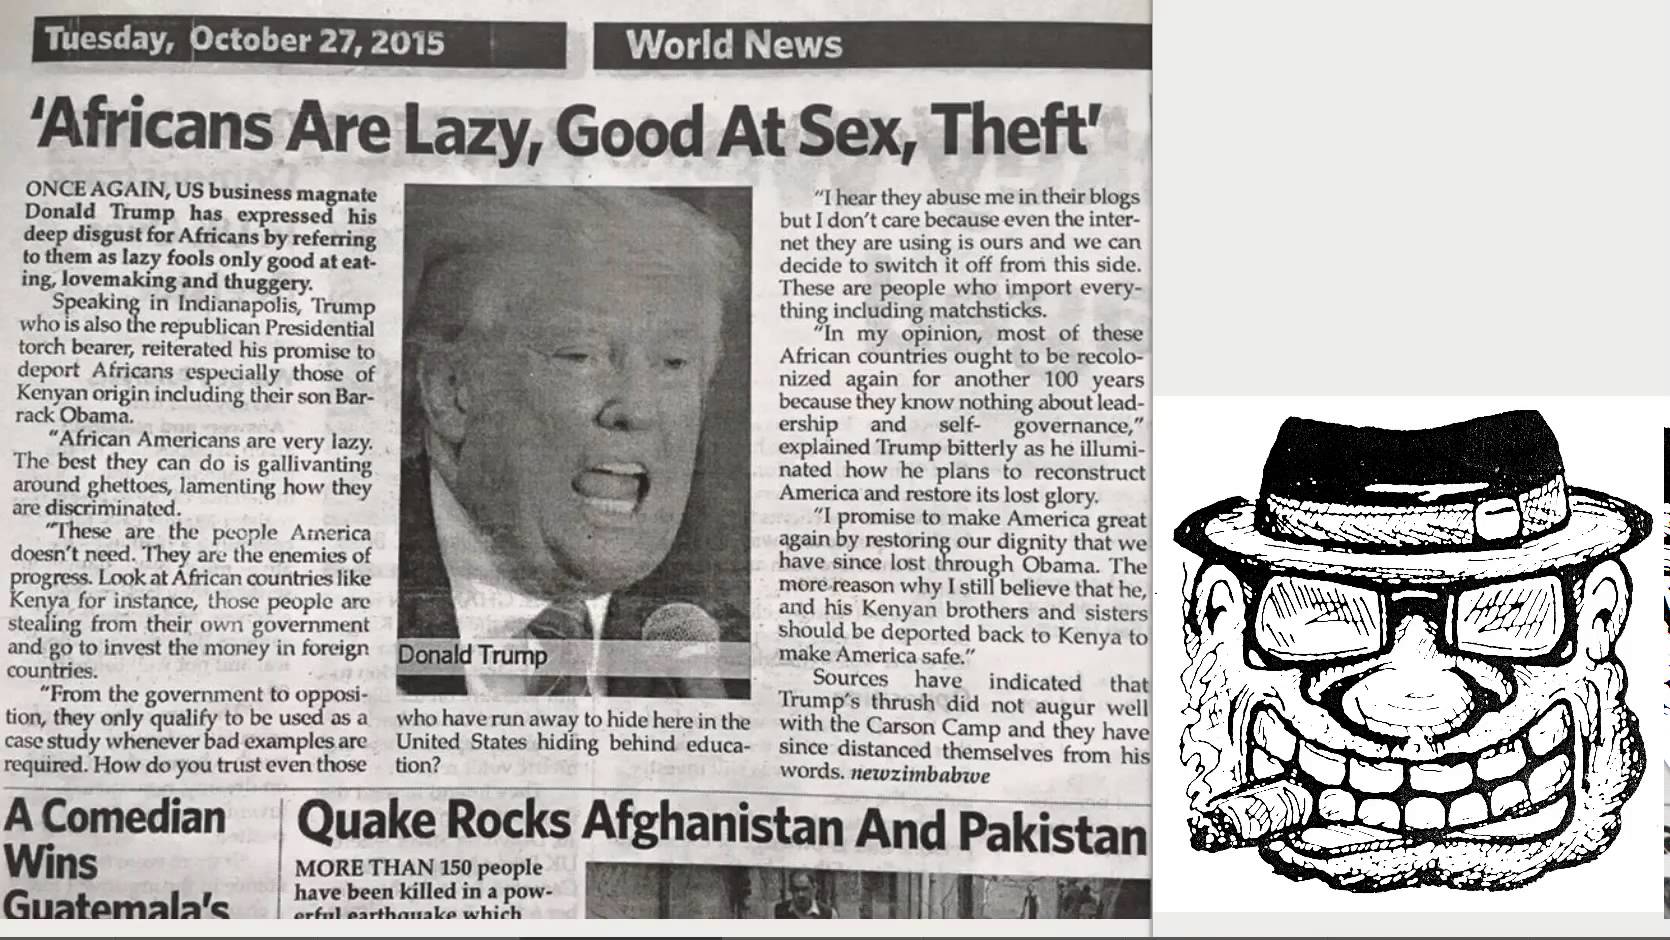 The Trumpisms about Africa began with Politica, a fake news site registered in Kenya, which reported last year that Trump said, “Some Africans are lazy fools only good at eating, lovemaking and stealing.”